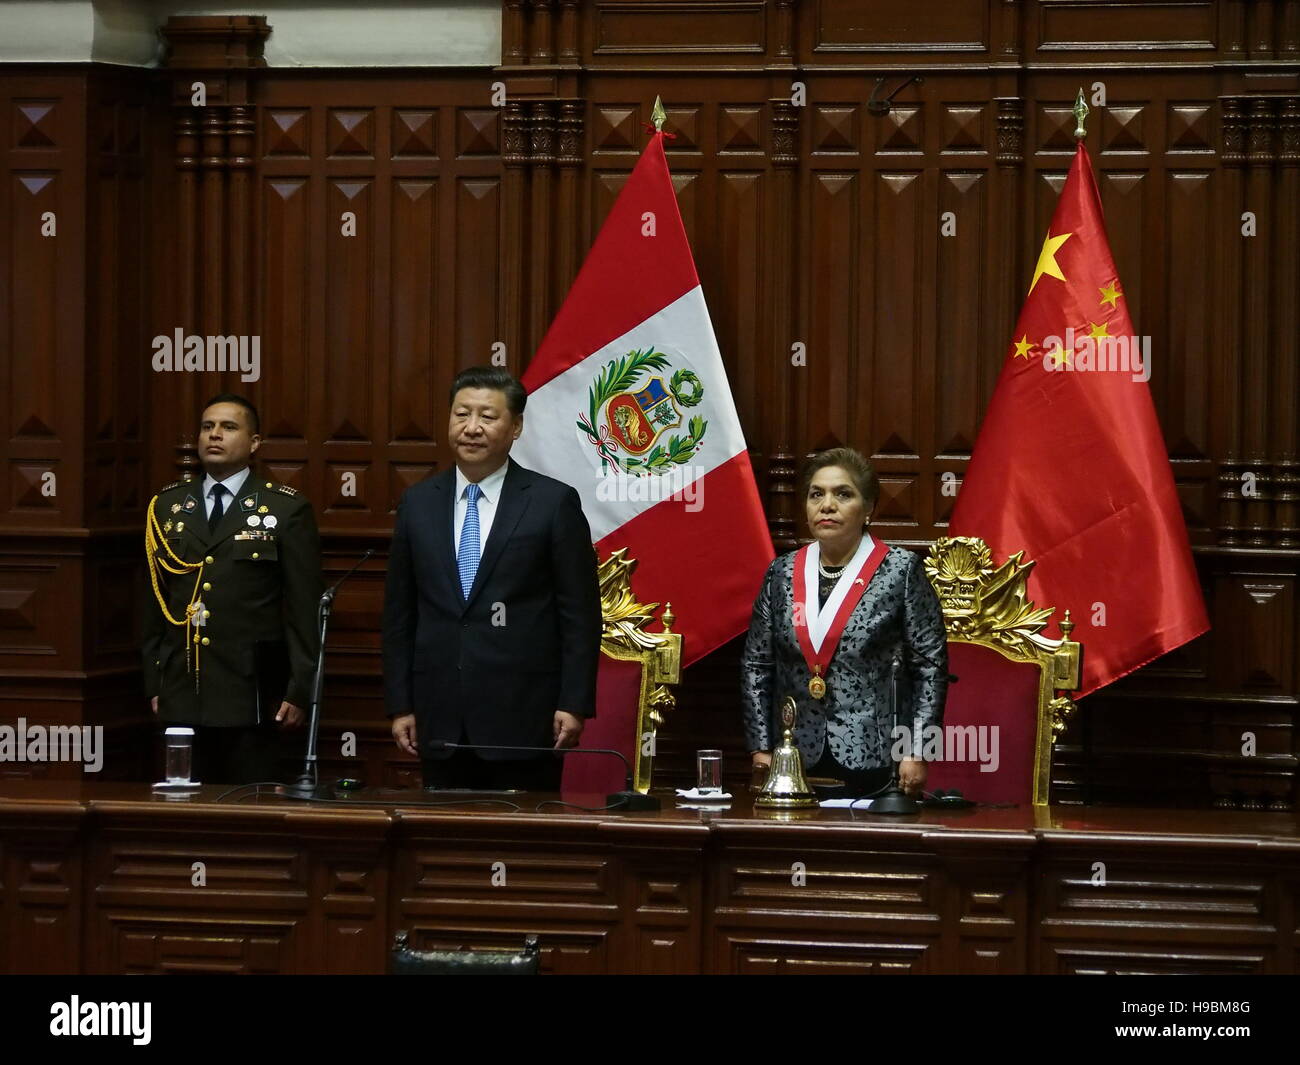 The President of the People's Republic of China, Xi Jinping, and Luz Salgado, president of the Peruvian Congress, in a solemn session in the hemicycle. Xi Jinping received the Medal of Honor of the Congress of the Republic of Peru, on the Grand Cross Degree, during the State visit to the XXXIV Summit of Leaders of the Asia Pacific Economic Forum (APEC 2016). © Fotoholica Press Agency/Alamy Live News Stock Photo